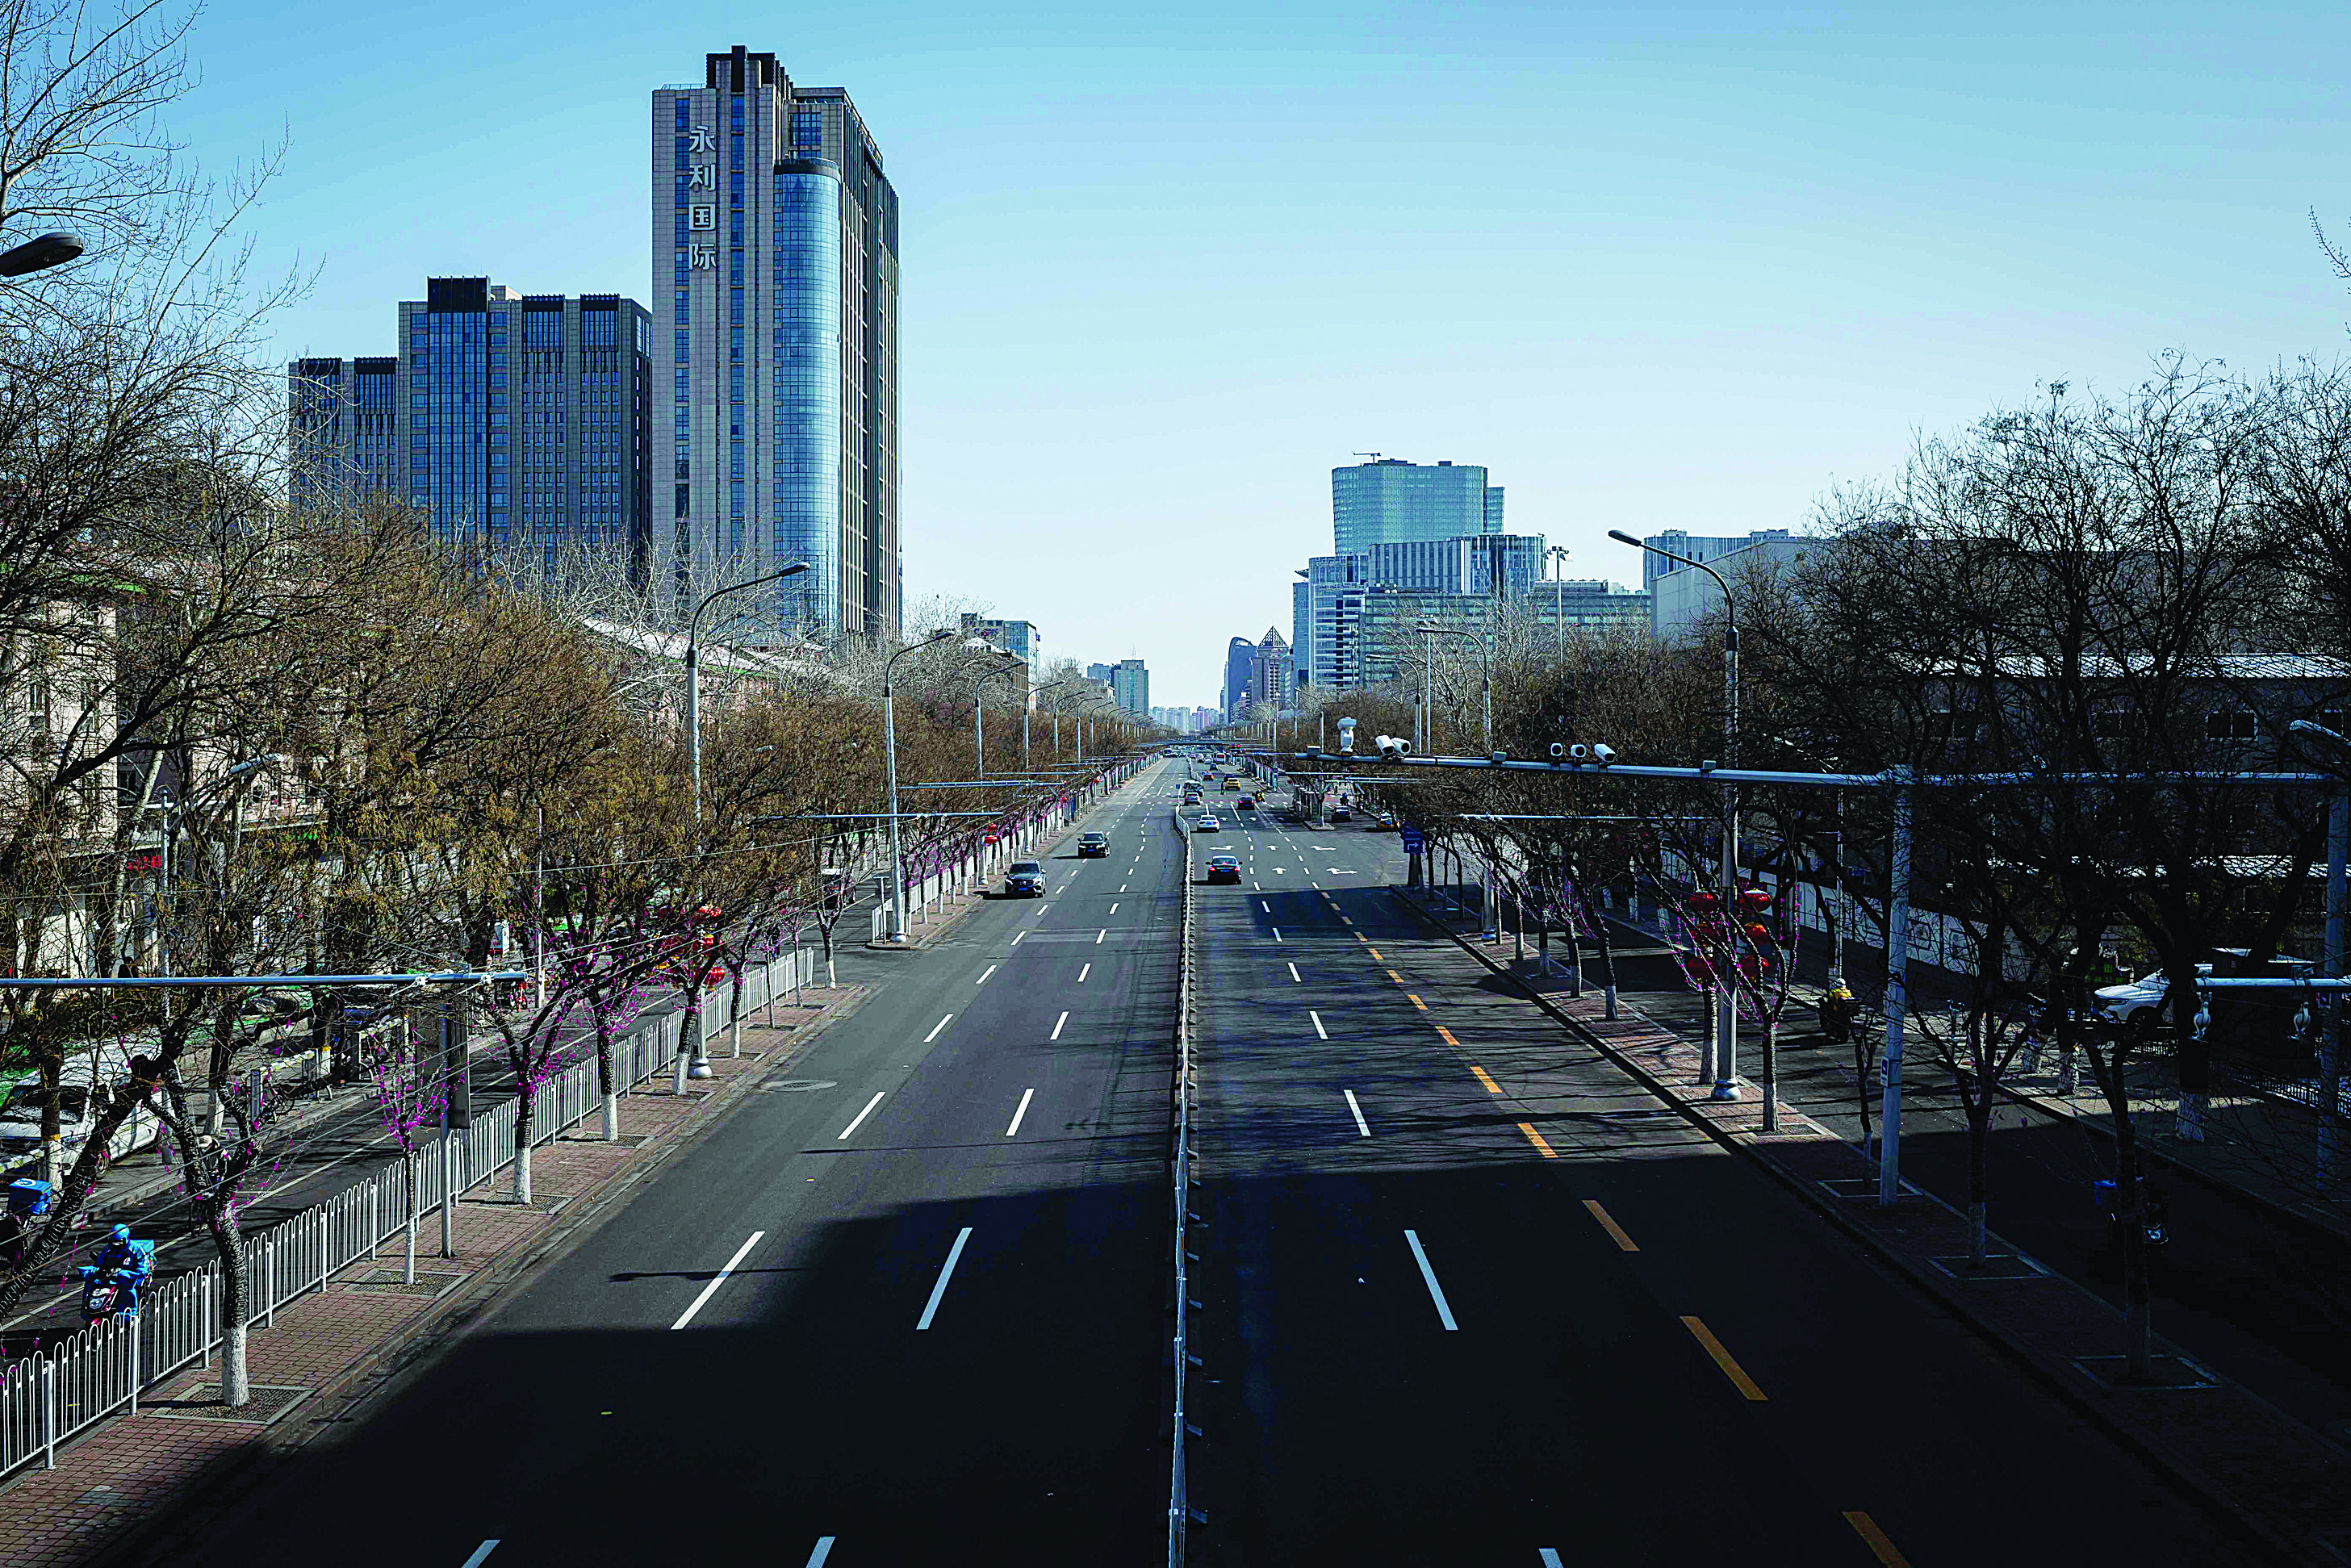 A nearly empty street is seen in Beijing on February 15, 2020. - The death toll from the new coronavirus outbreak jumped past 1,500 in China as France reported the first fatality outside Asia, fuelling global concerns about the epidemic (Photo by NICOLAS ASFOURI / AFP)